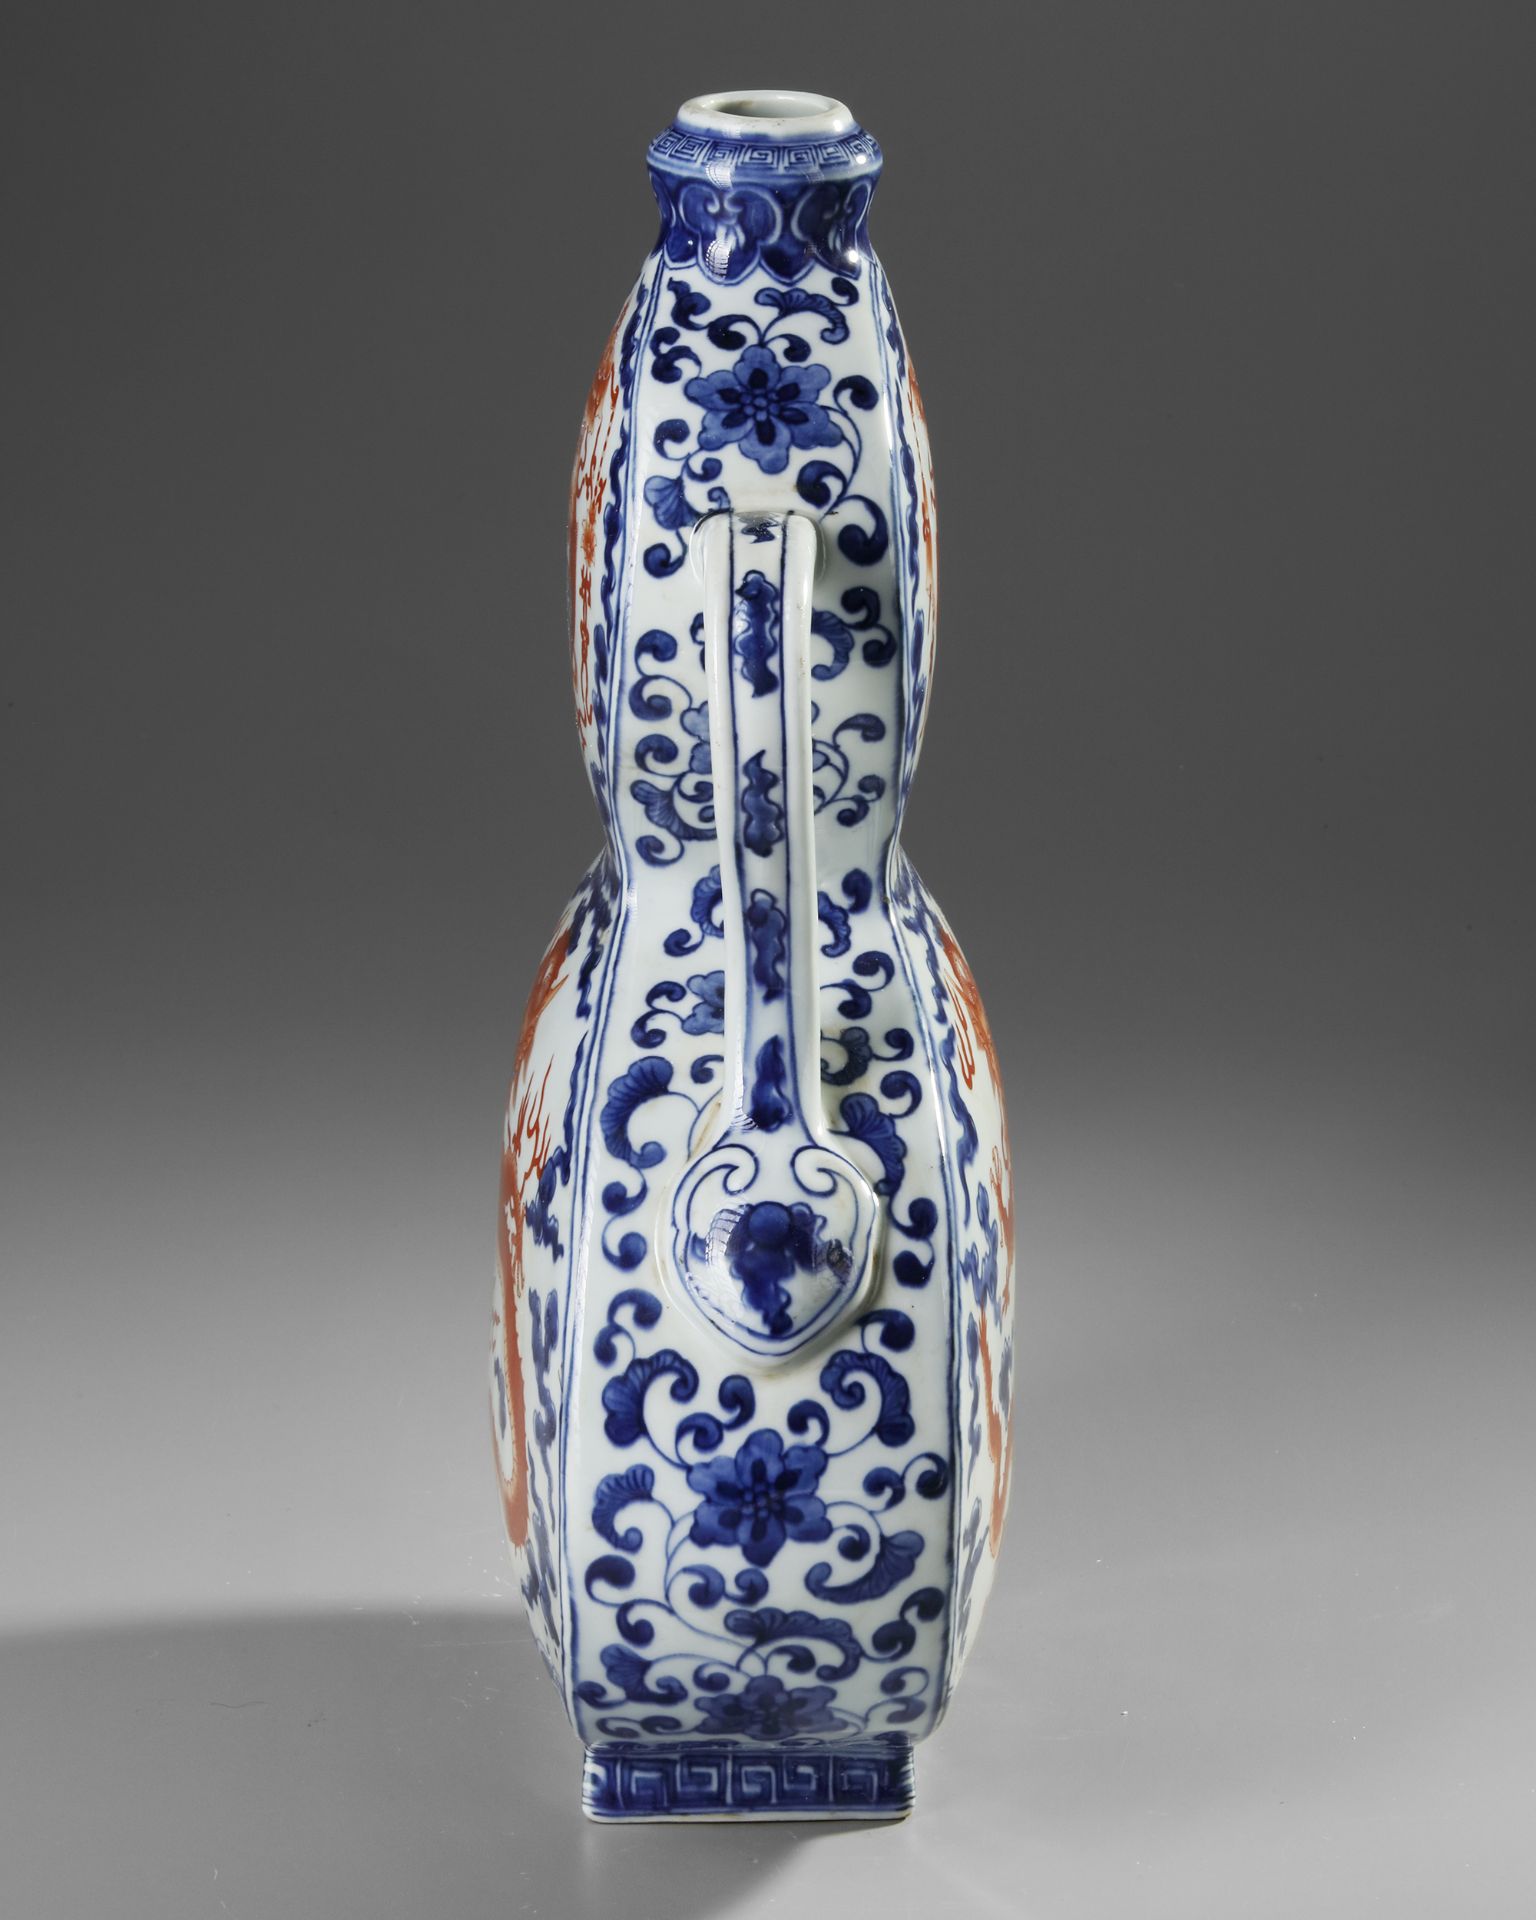 A CHINESE IRON-RED DECORATED BLUE AND WHITE VASE, 19TH-20TH CENTURY - Image 3 of 5